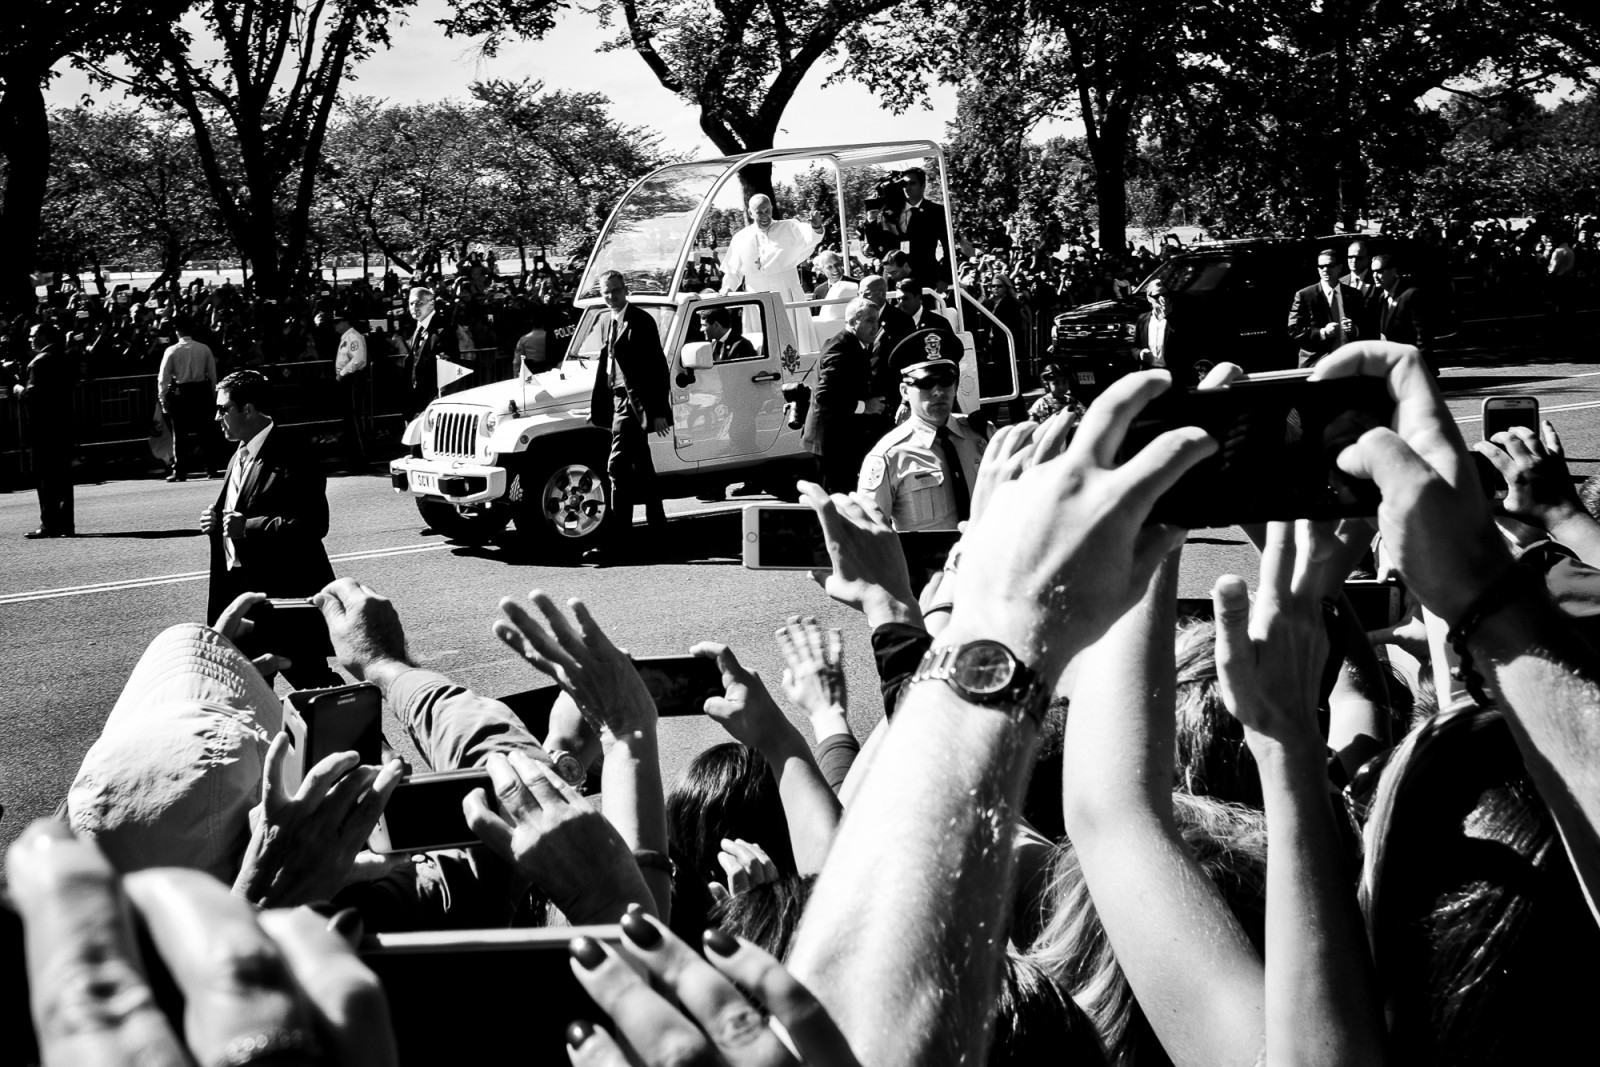 Spectators cheer for Pope Francis as he passes by in his “popemobile,” as he is driven on the streets around the Ellipse, south of the White House in Washington, District of Columbia, U.S., on Wednesday, Sept. 23, 2015.  Credit: Pete Marovich/Bloomberg